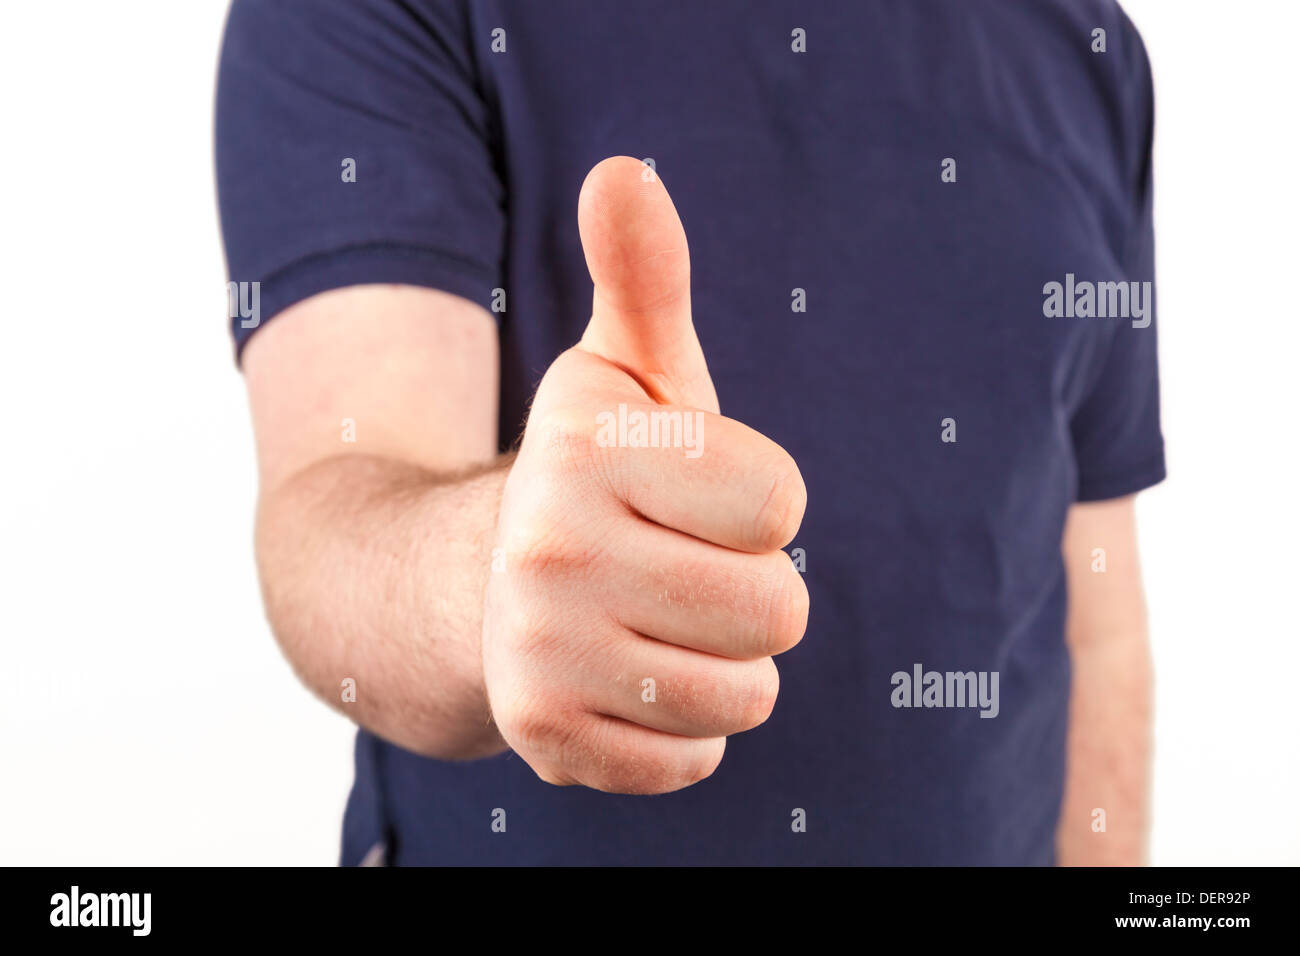 Young man giving a thumbs up sign Stock Photo